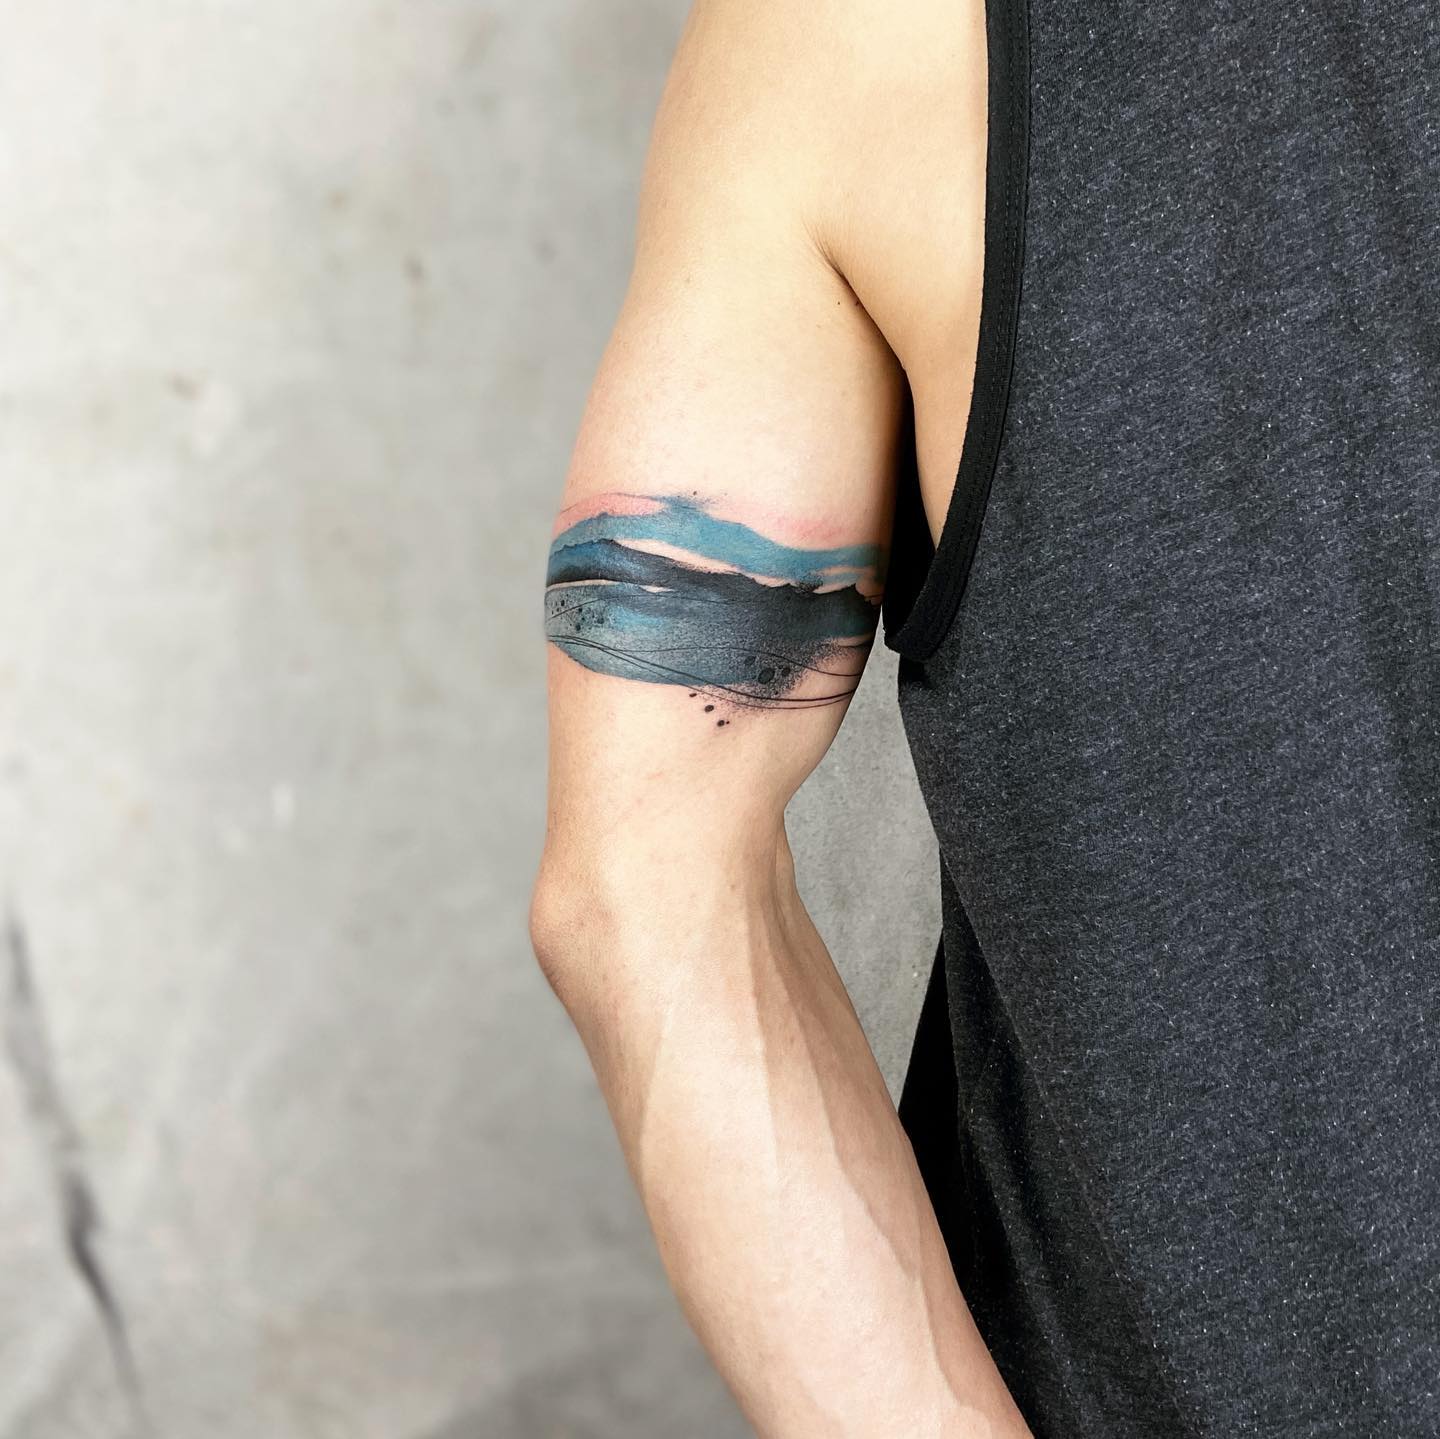 30+ Cool Armband Tattoo Ideas: Meaning & Popular Examples - 100 Tattoos